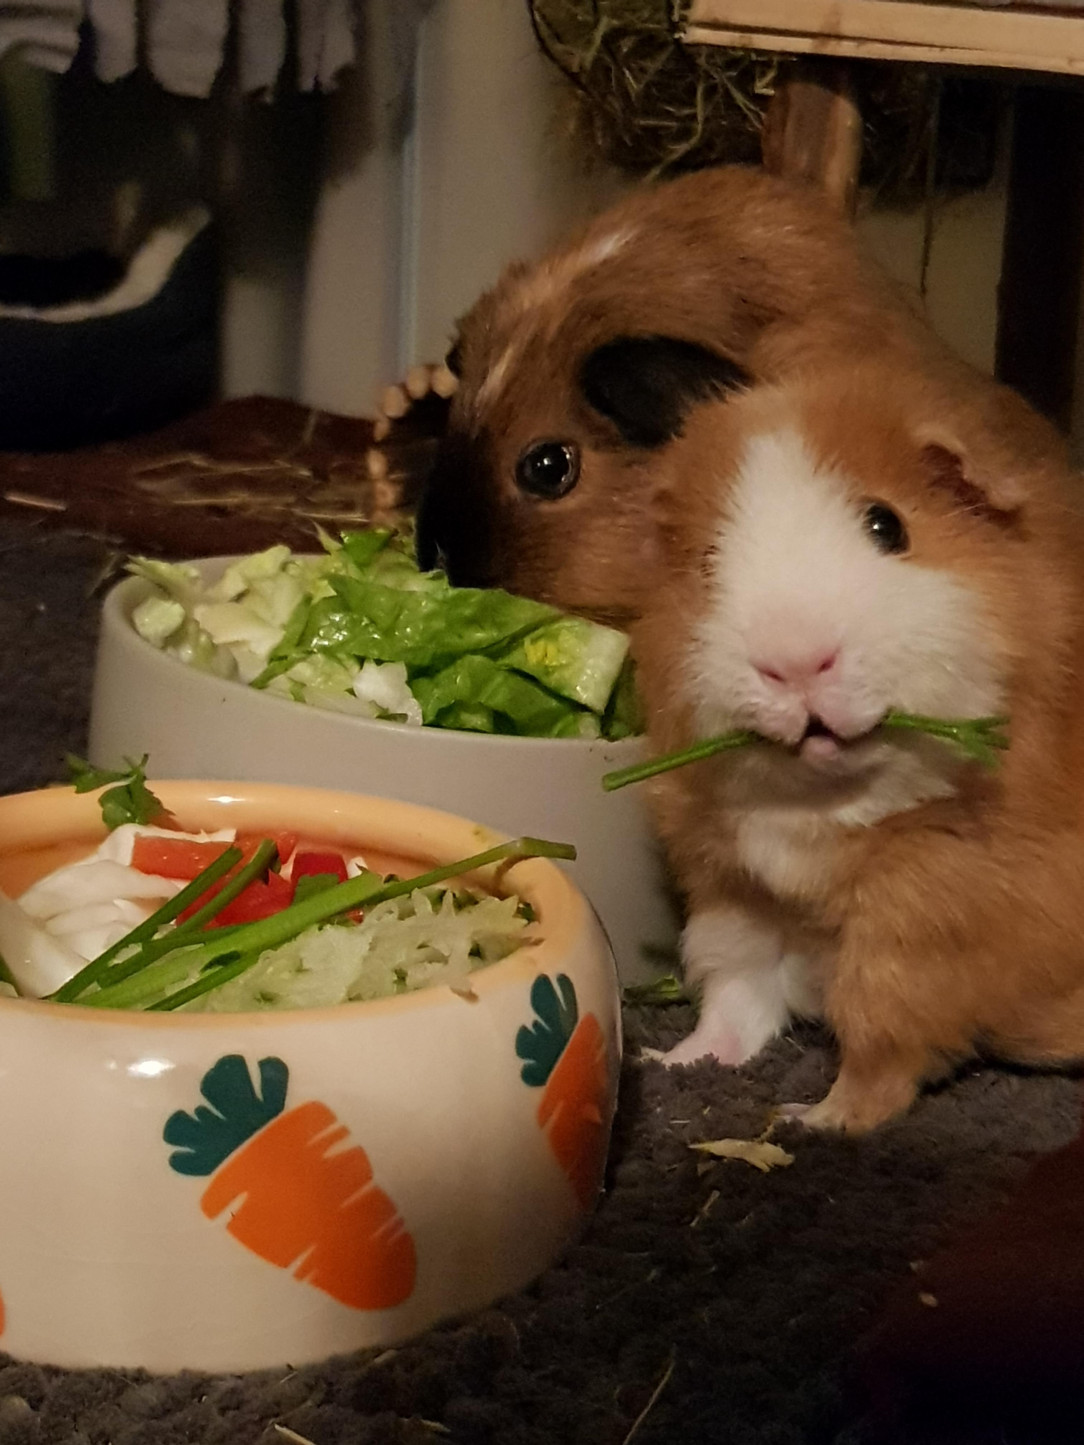 his name is Onion and he really likes parsley